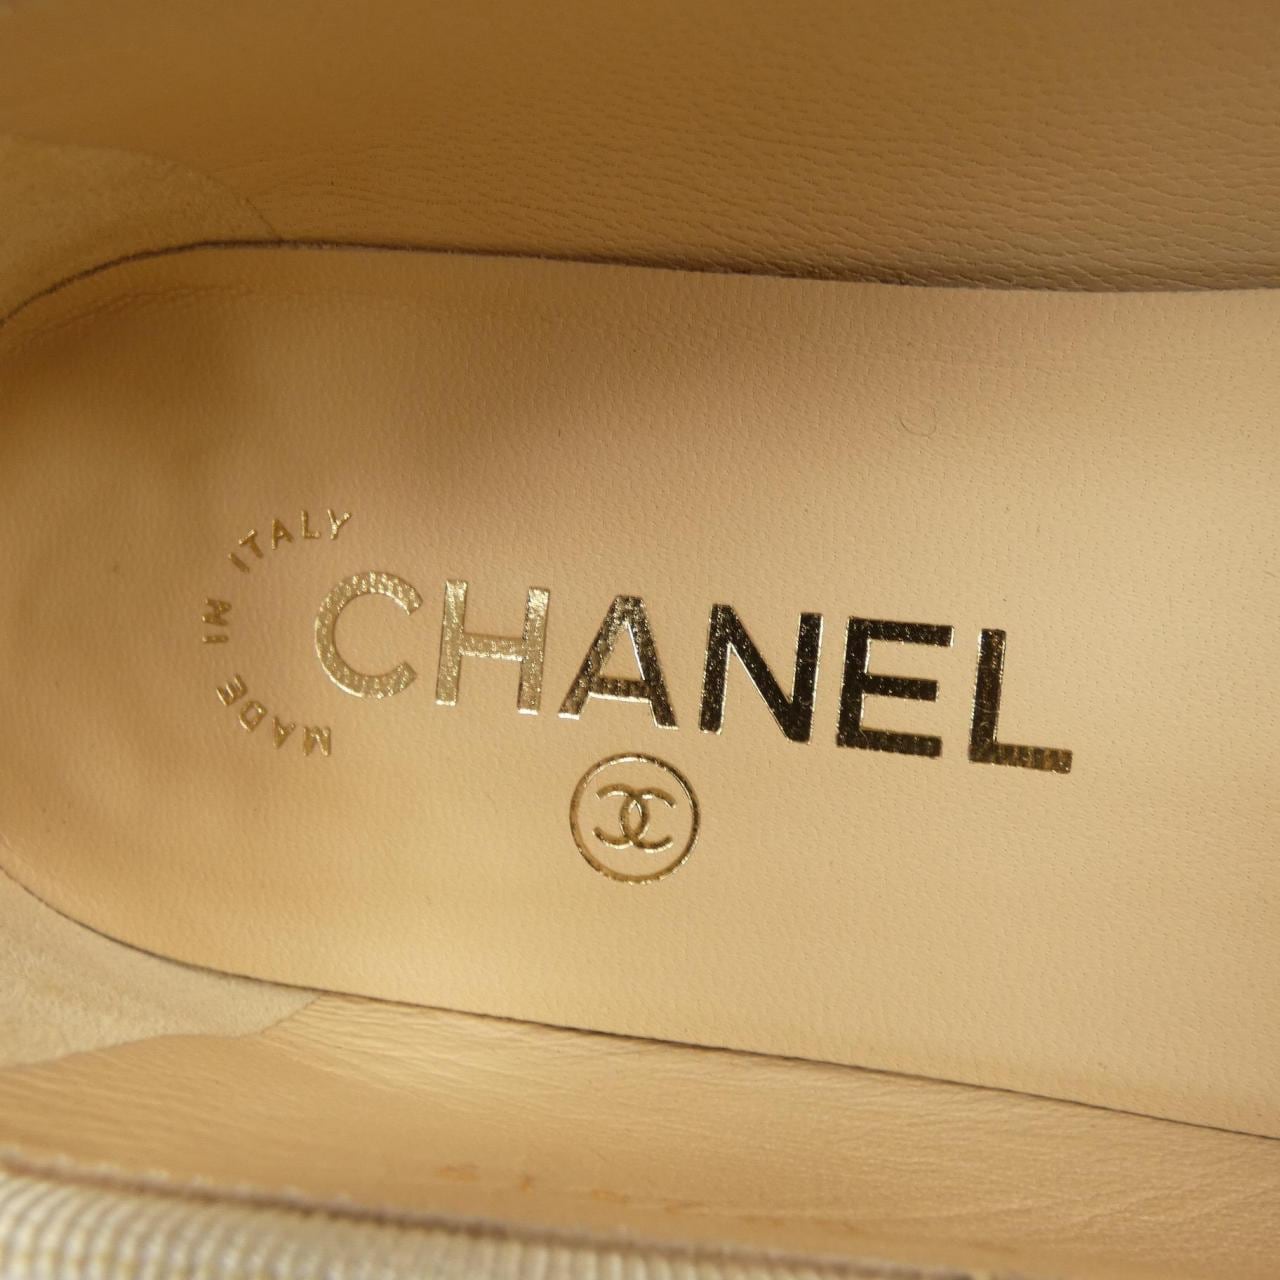 CHANEL CHANEL Flat Shoes